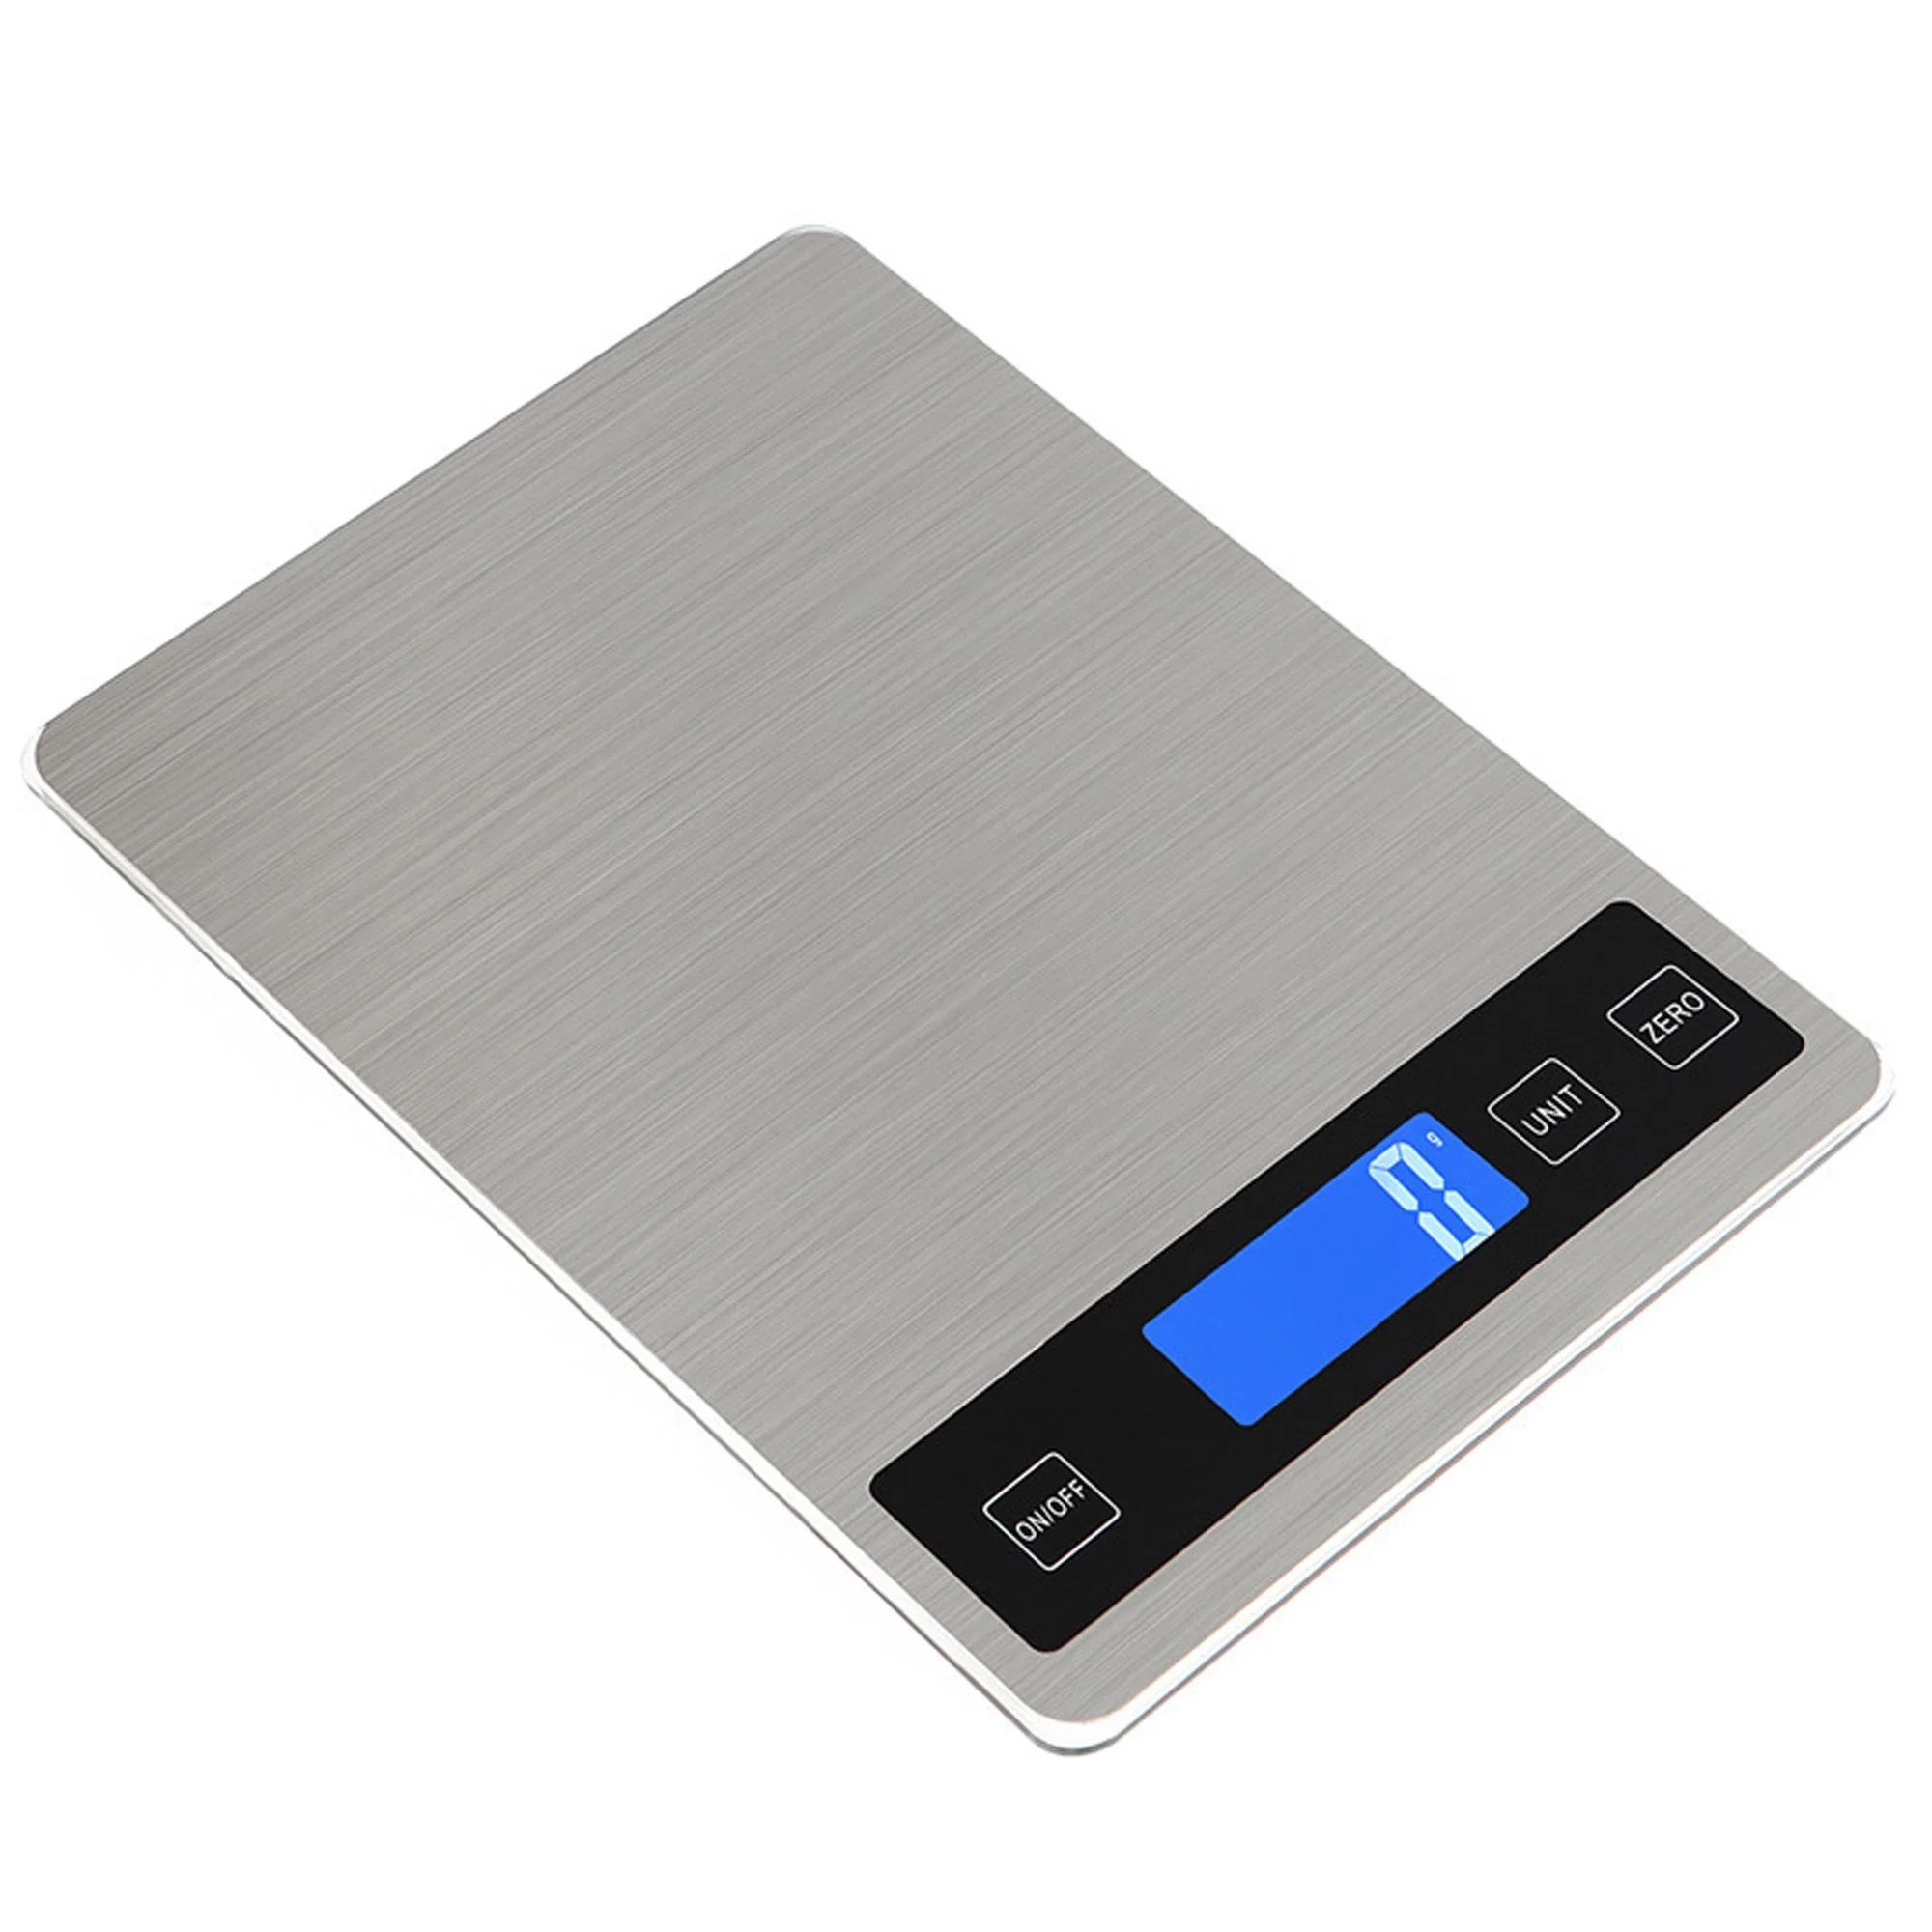 Digital Kitchen Grey Stainless Steel Scale Weight Grams and Oz for Cooking Baking Food Scale